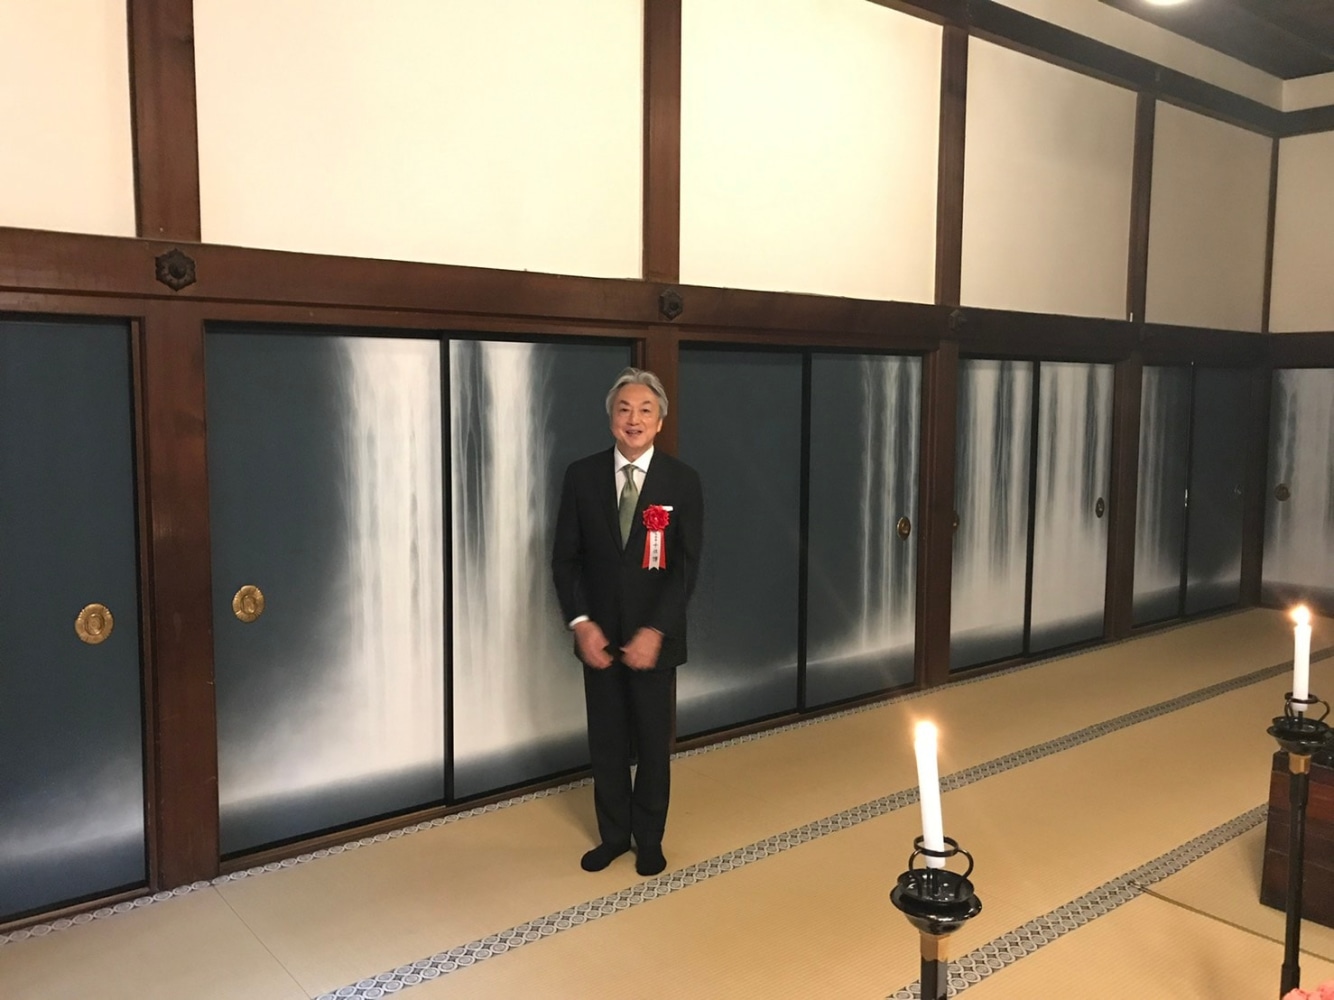 The Waterfall works were mounted on the backside of Kano school fusuma.&amp;nbsp; The anniversary of Buddha&amp;#39;s passing is commemorated in this particular room every year.
I aimed for pure and sublime work. &amp;nbsp;&amp;nbsp;